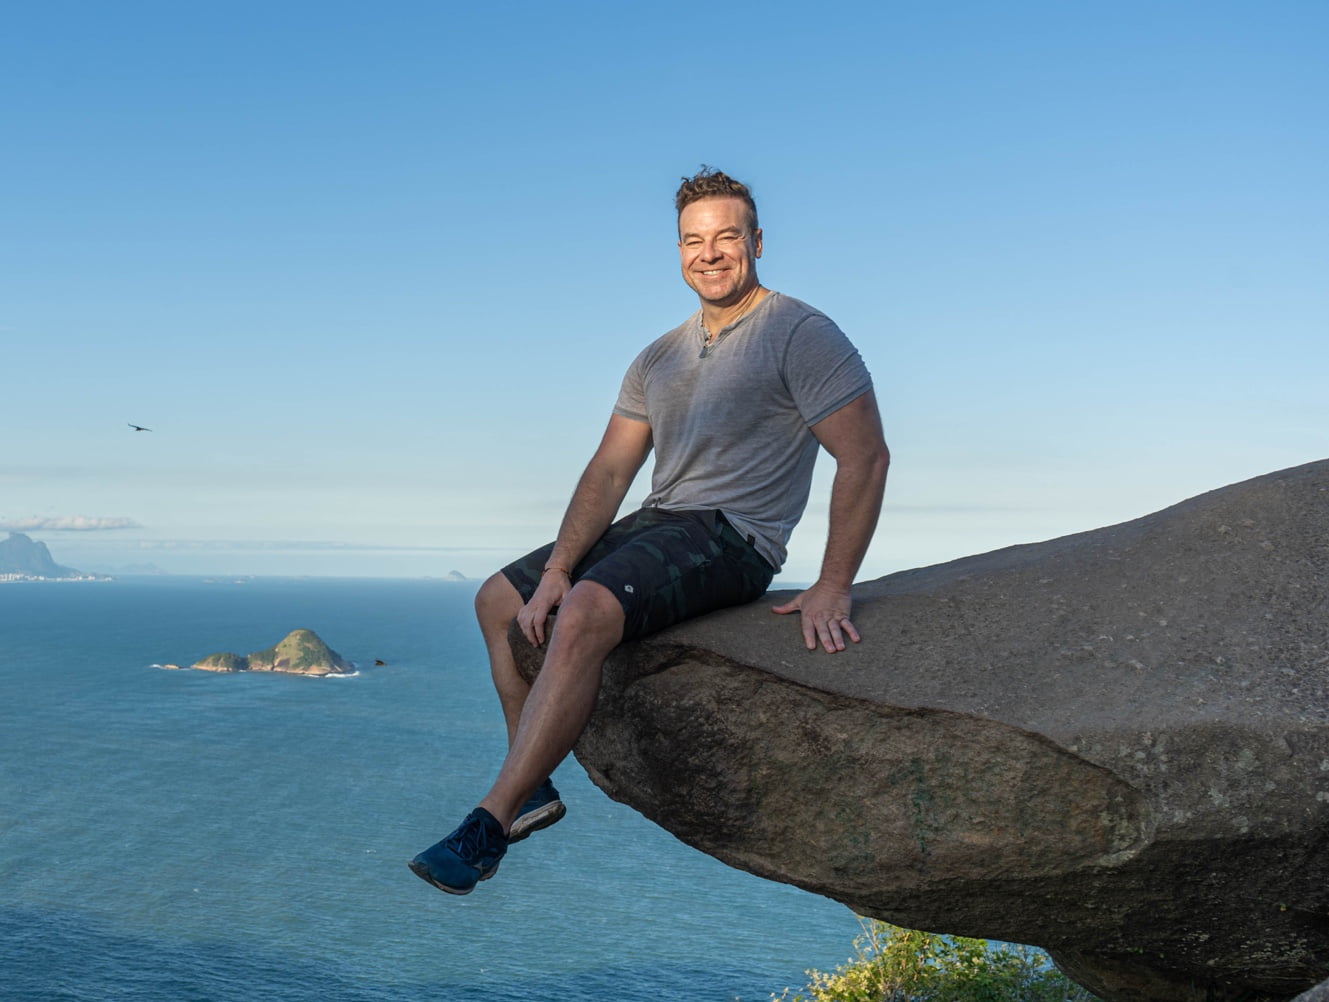 The man is sitting on the edge of a rock formation, with a vast ocean and islands in the background, sporting a relaxed and happy demeanor.